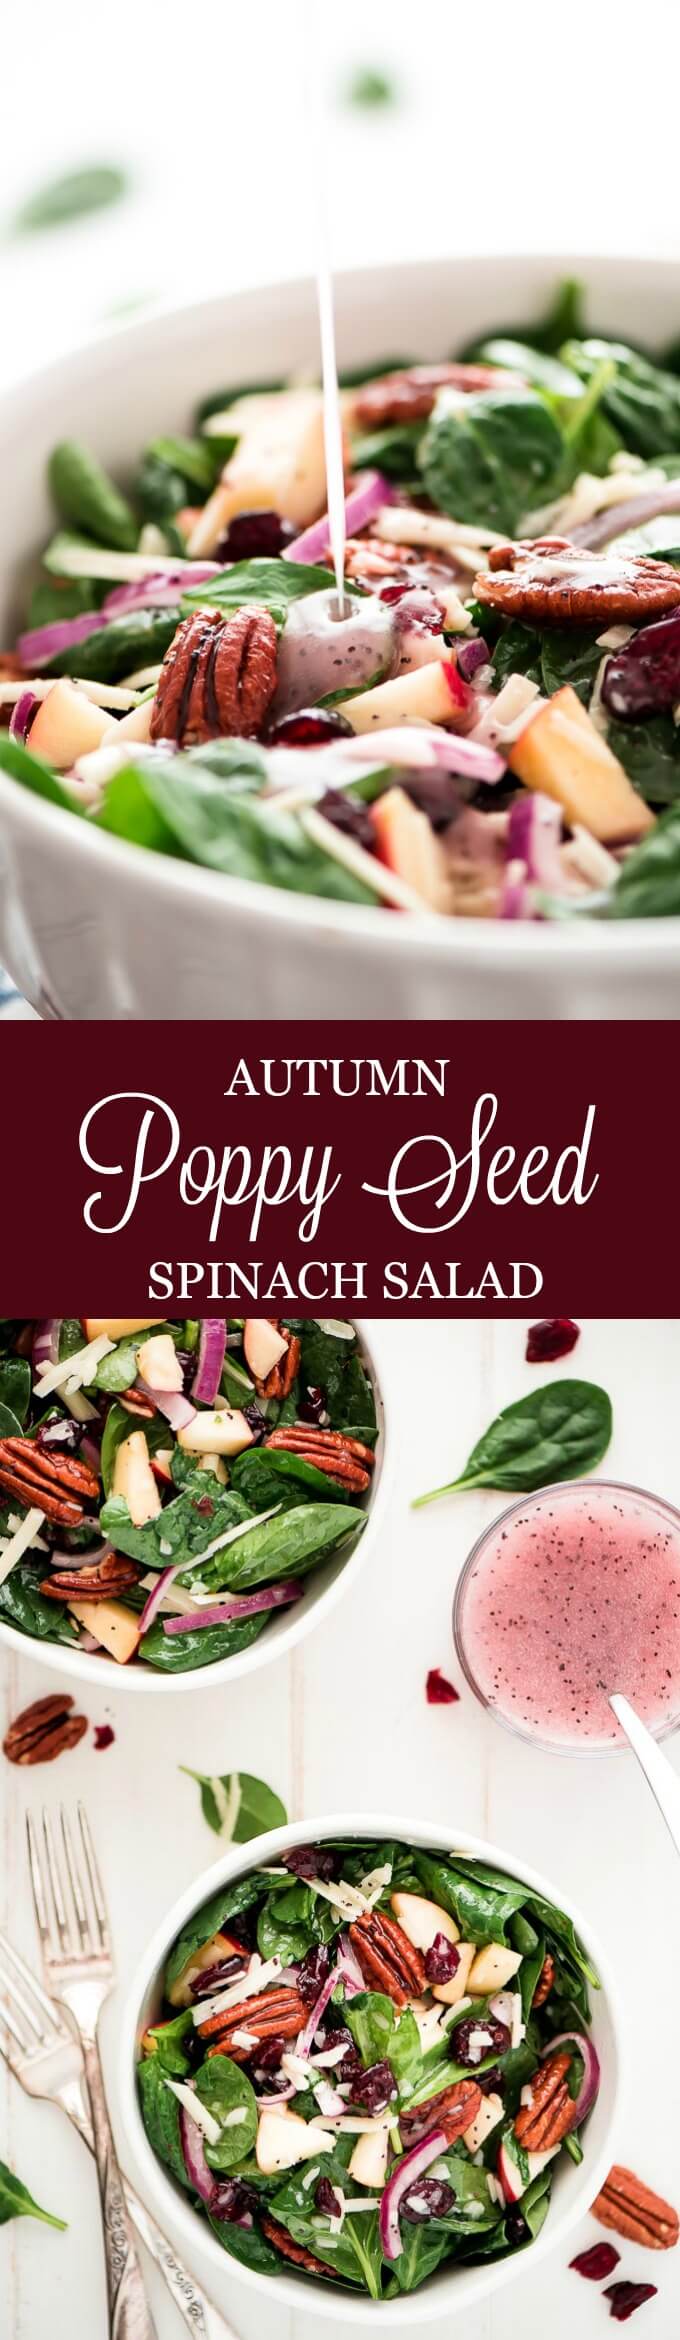 Autumn Poppy Seed Spinach Salad is the perfect side to any dinner. It's loaded with amazing toppings, good-for-you greens, and topped with the most delicious homemade poppy seed dressing.